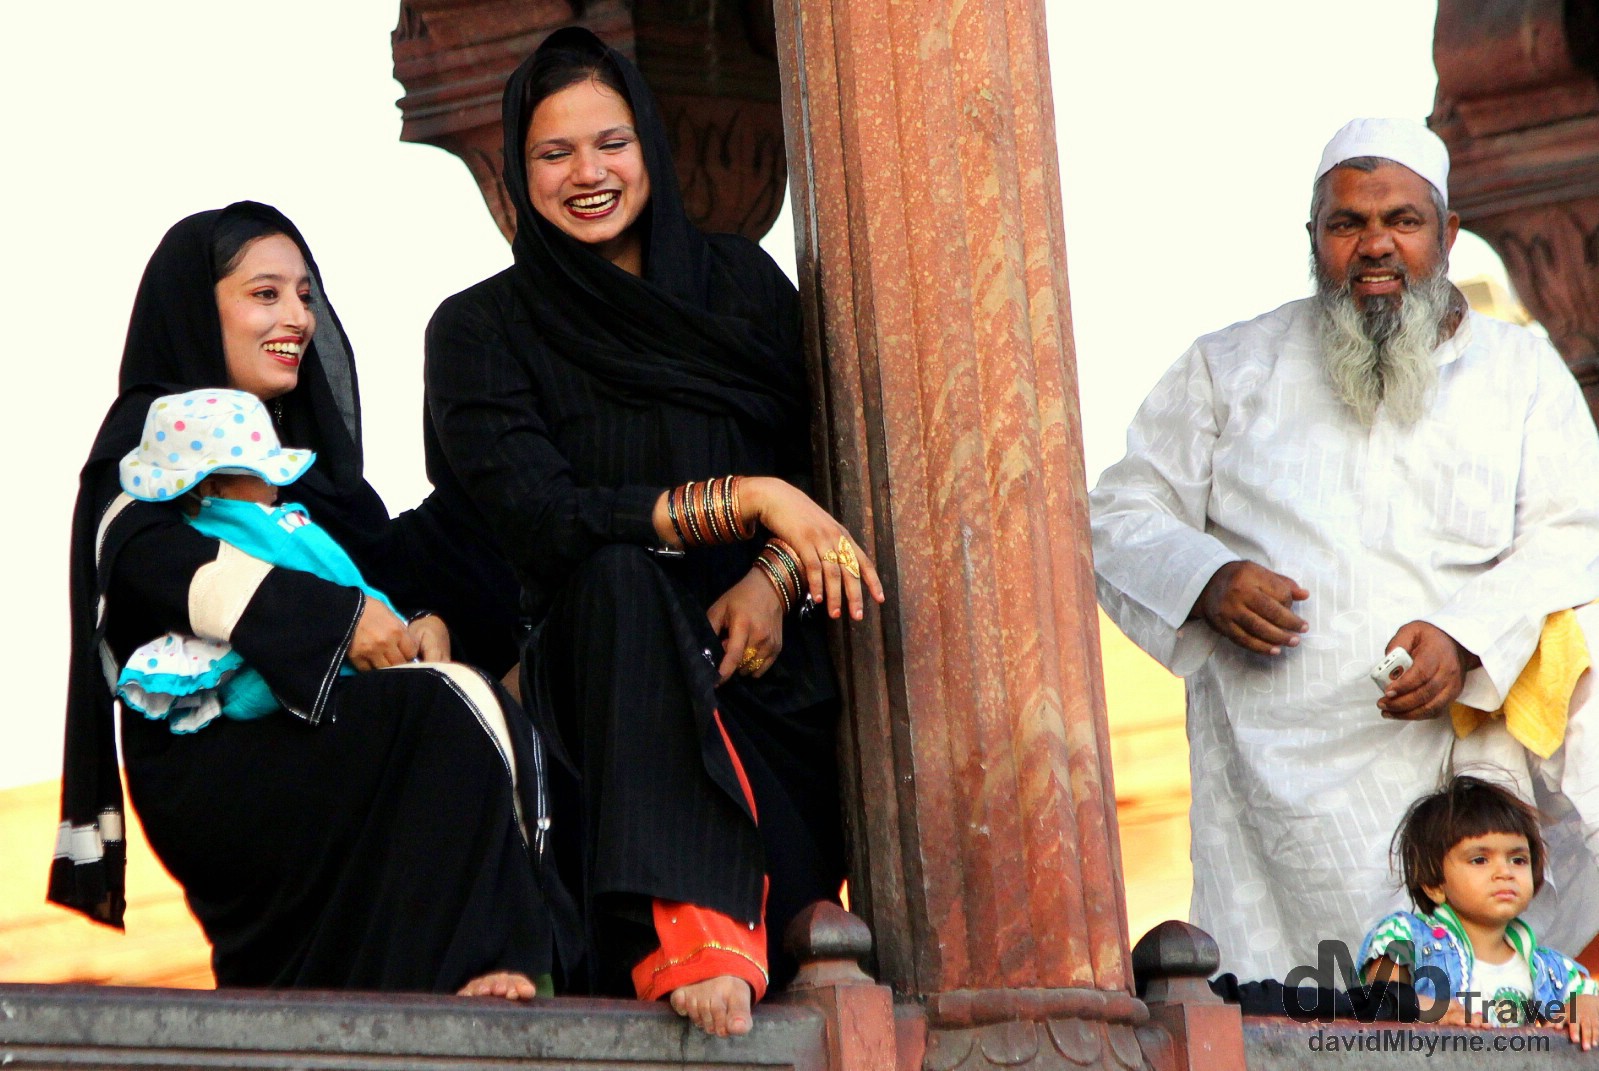 Smiling in the grounds of the Jama Masjid, Old Delhi, Delhi, India. October 7th 2102.